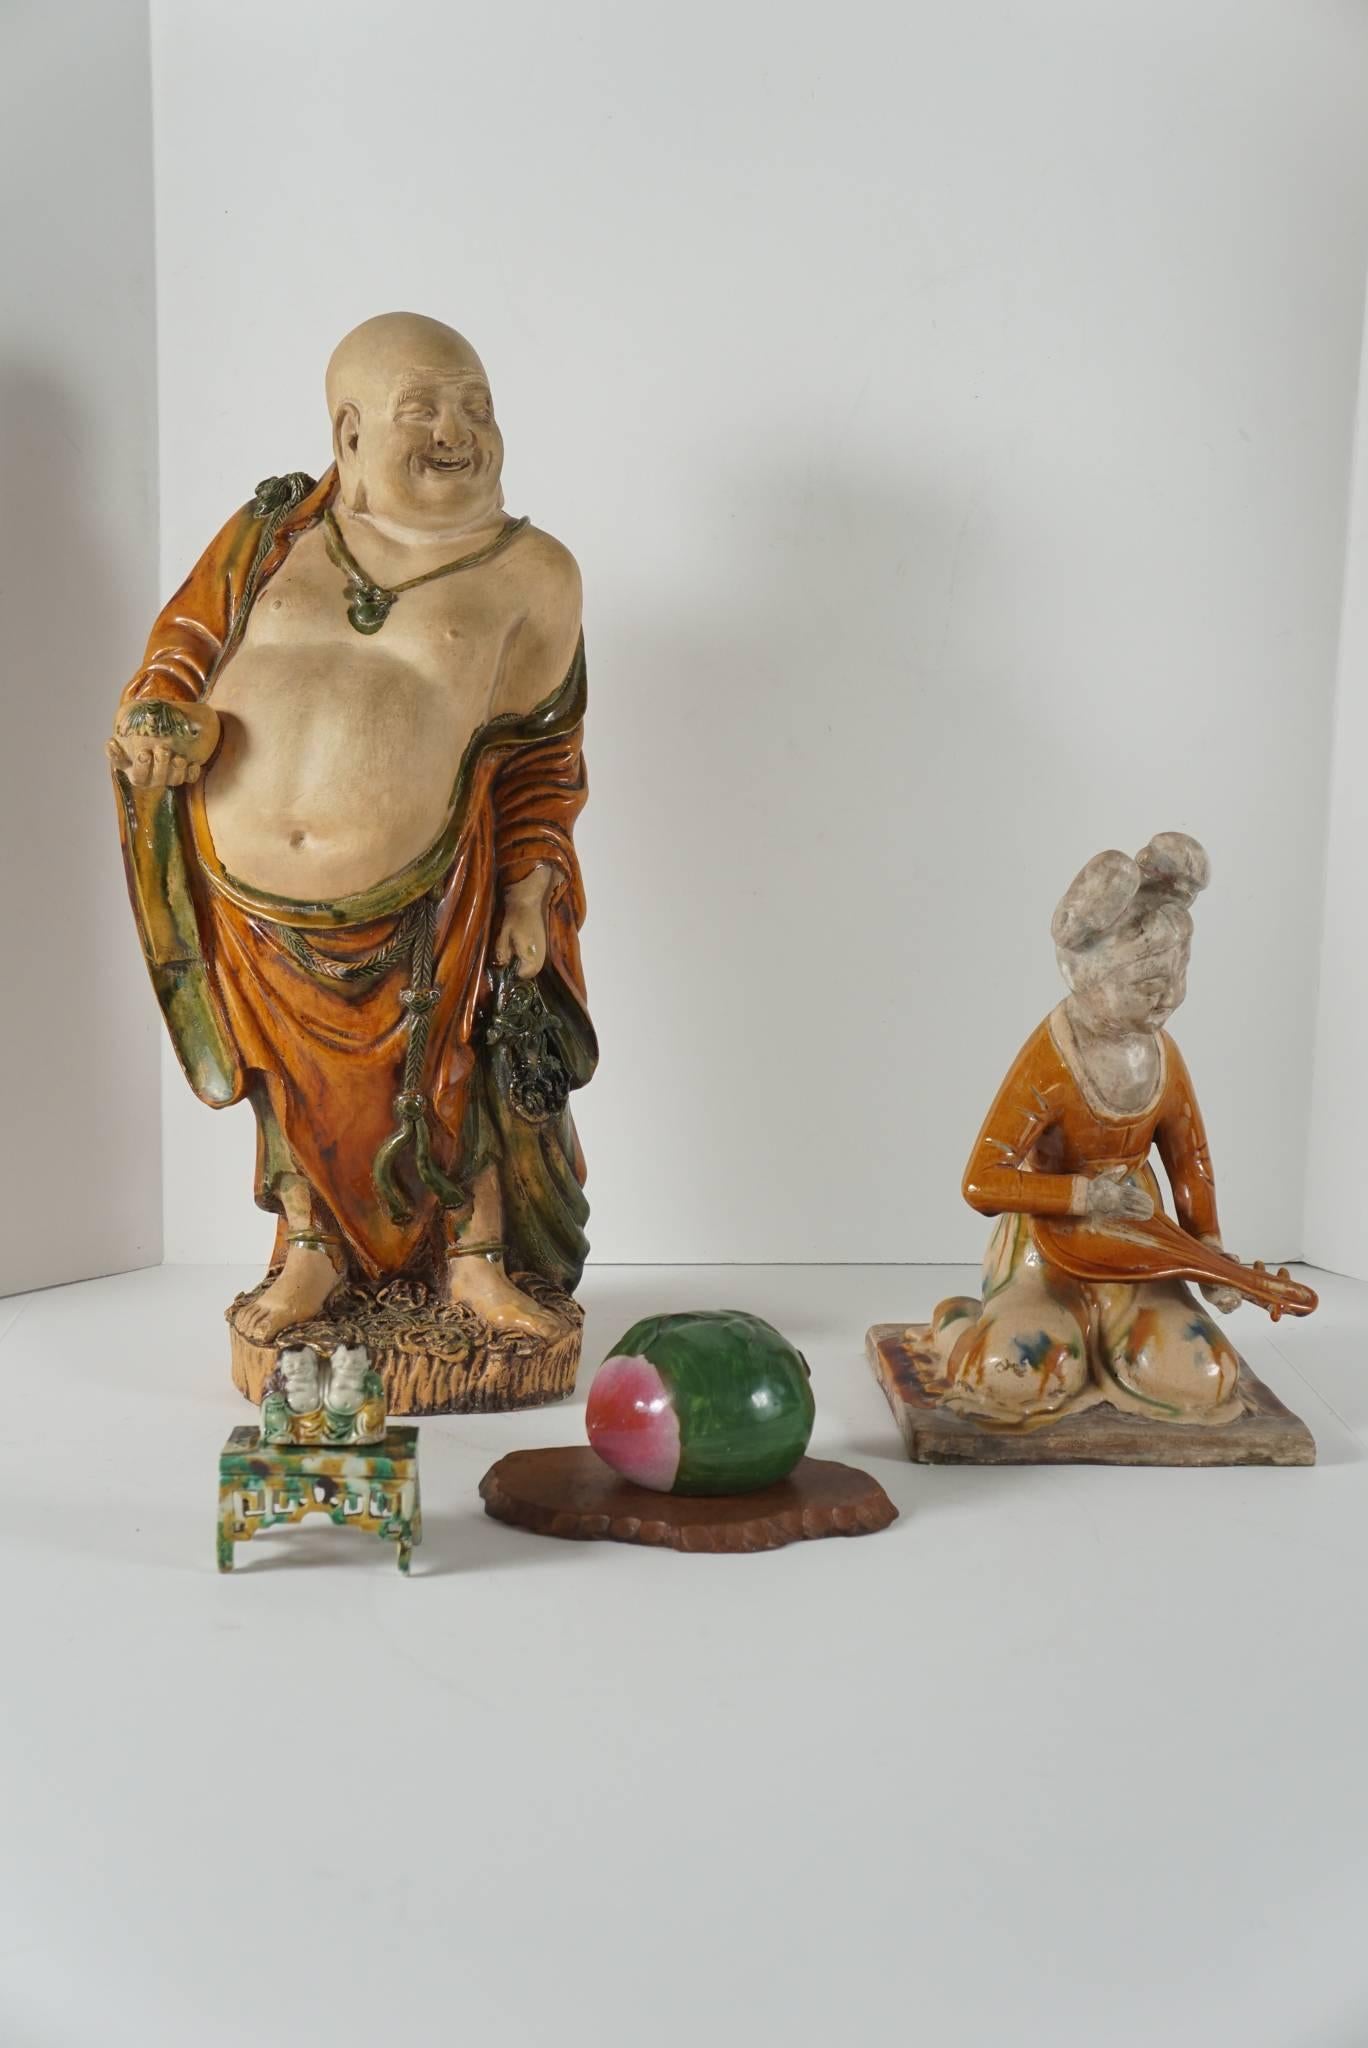 This collection includes a large standing Buddha holding a bowl wearing flowing draped robes, a Tang style kneeling figure of a court musician, a very nice small group of pot bellied figures set on a separate stand with a pierced apron and a single